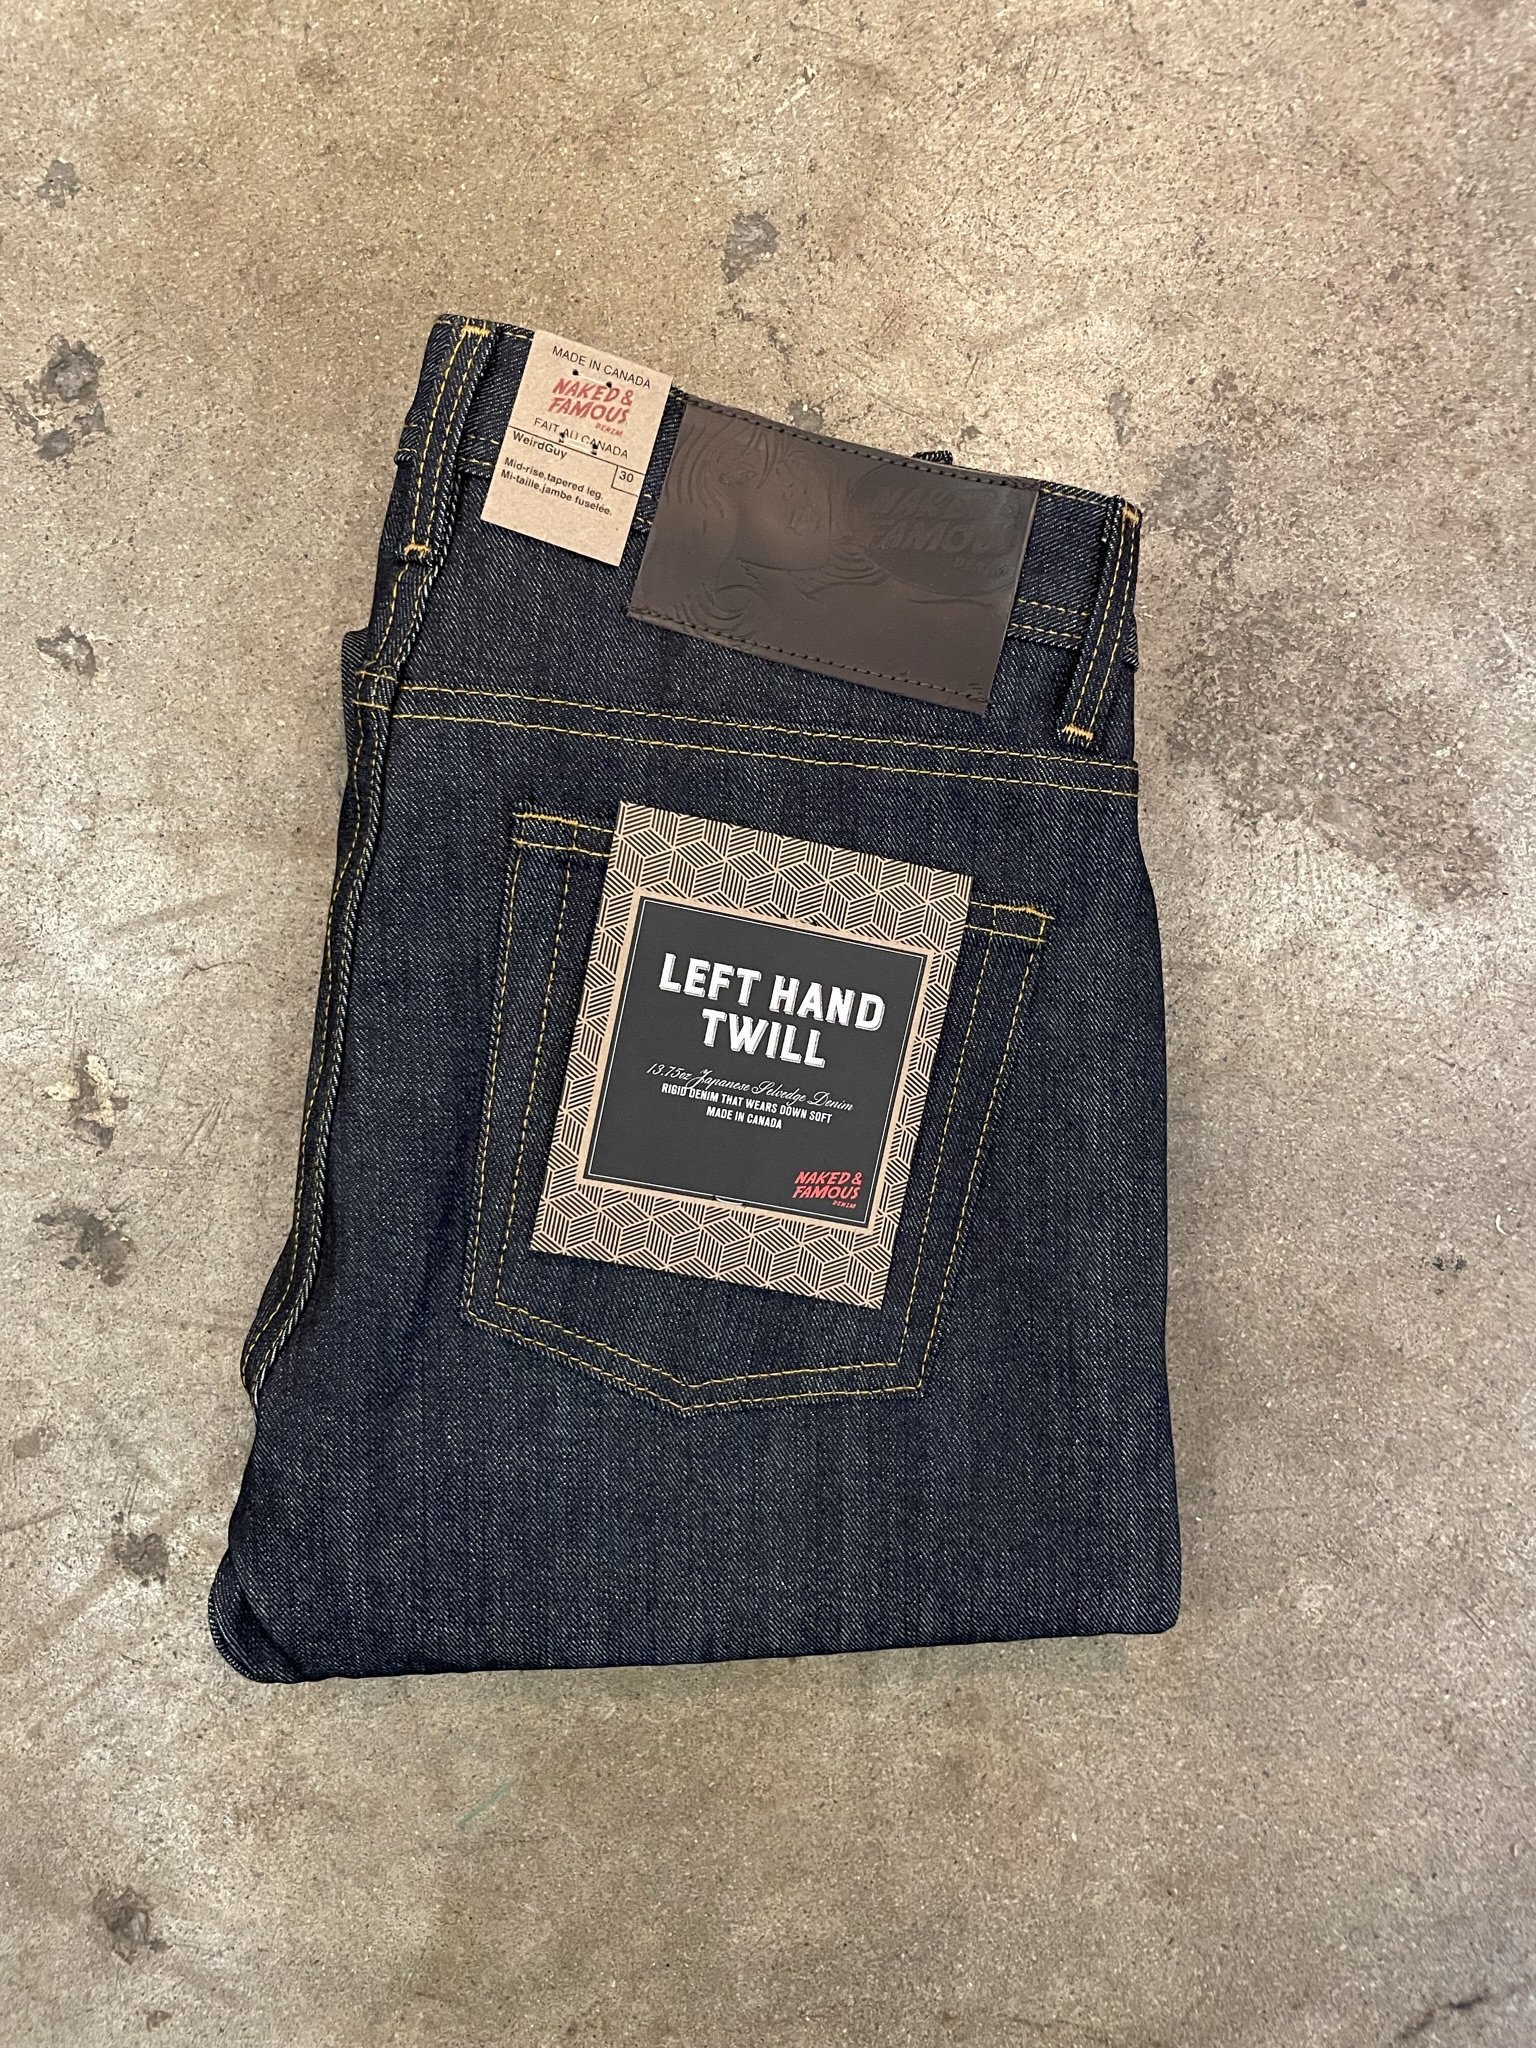 Timber Trade Co.- Selvedge Denim and Curated Menswear